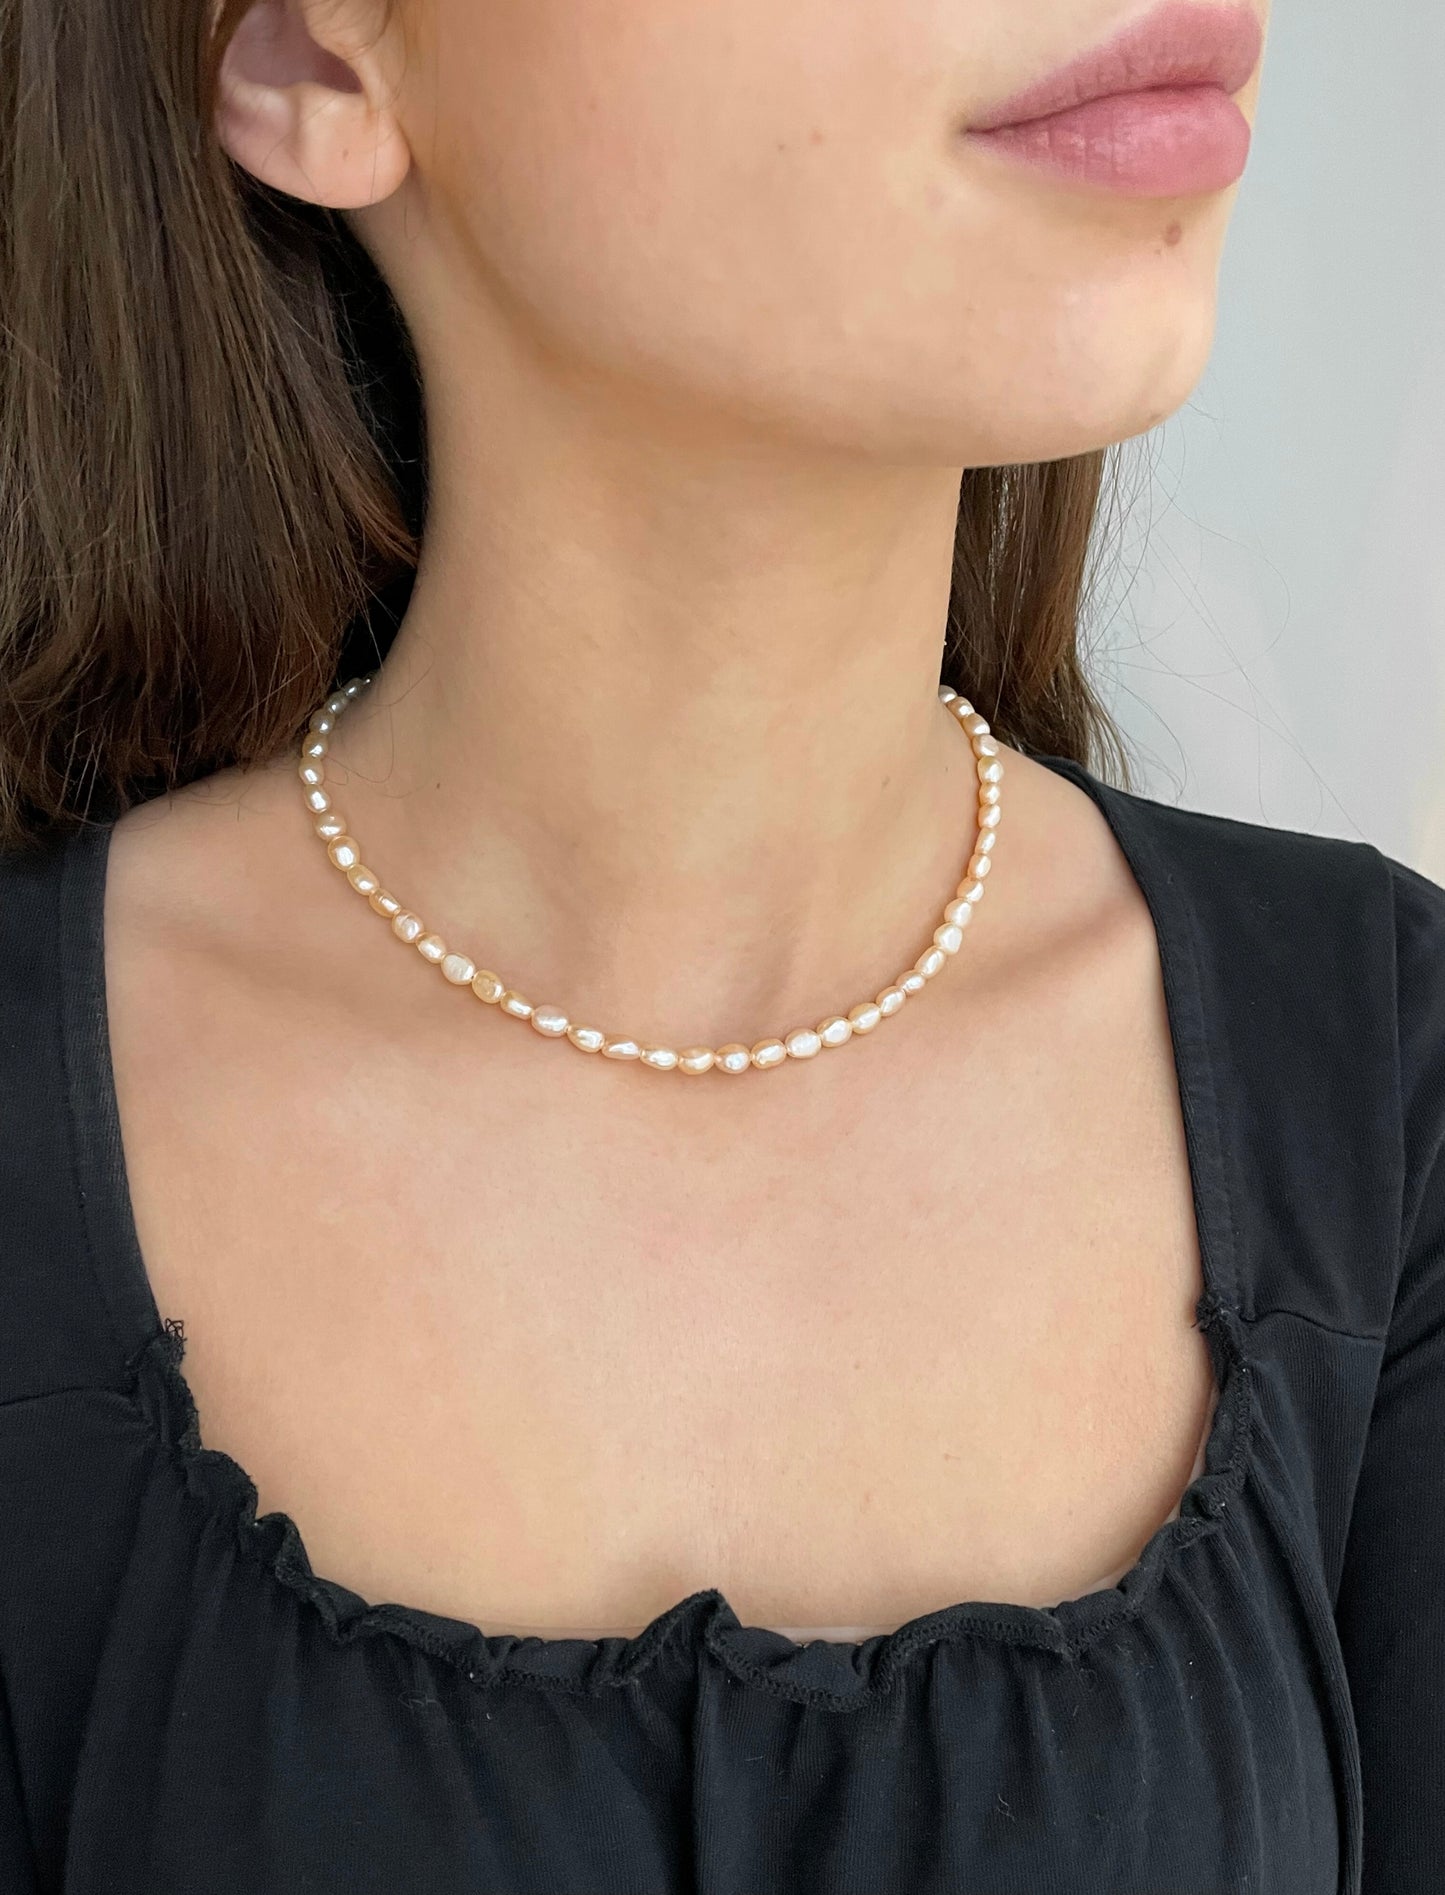 Peachy pink pearl necklace